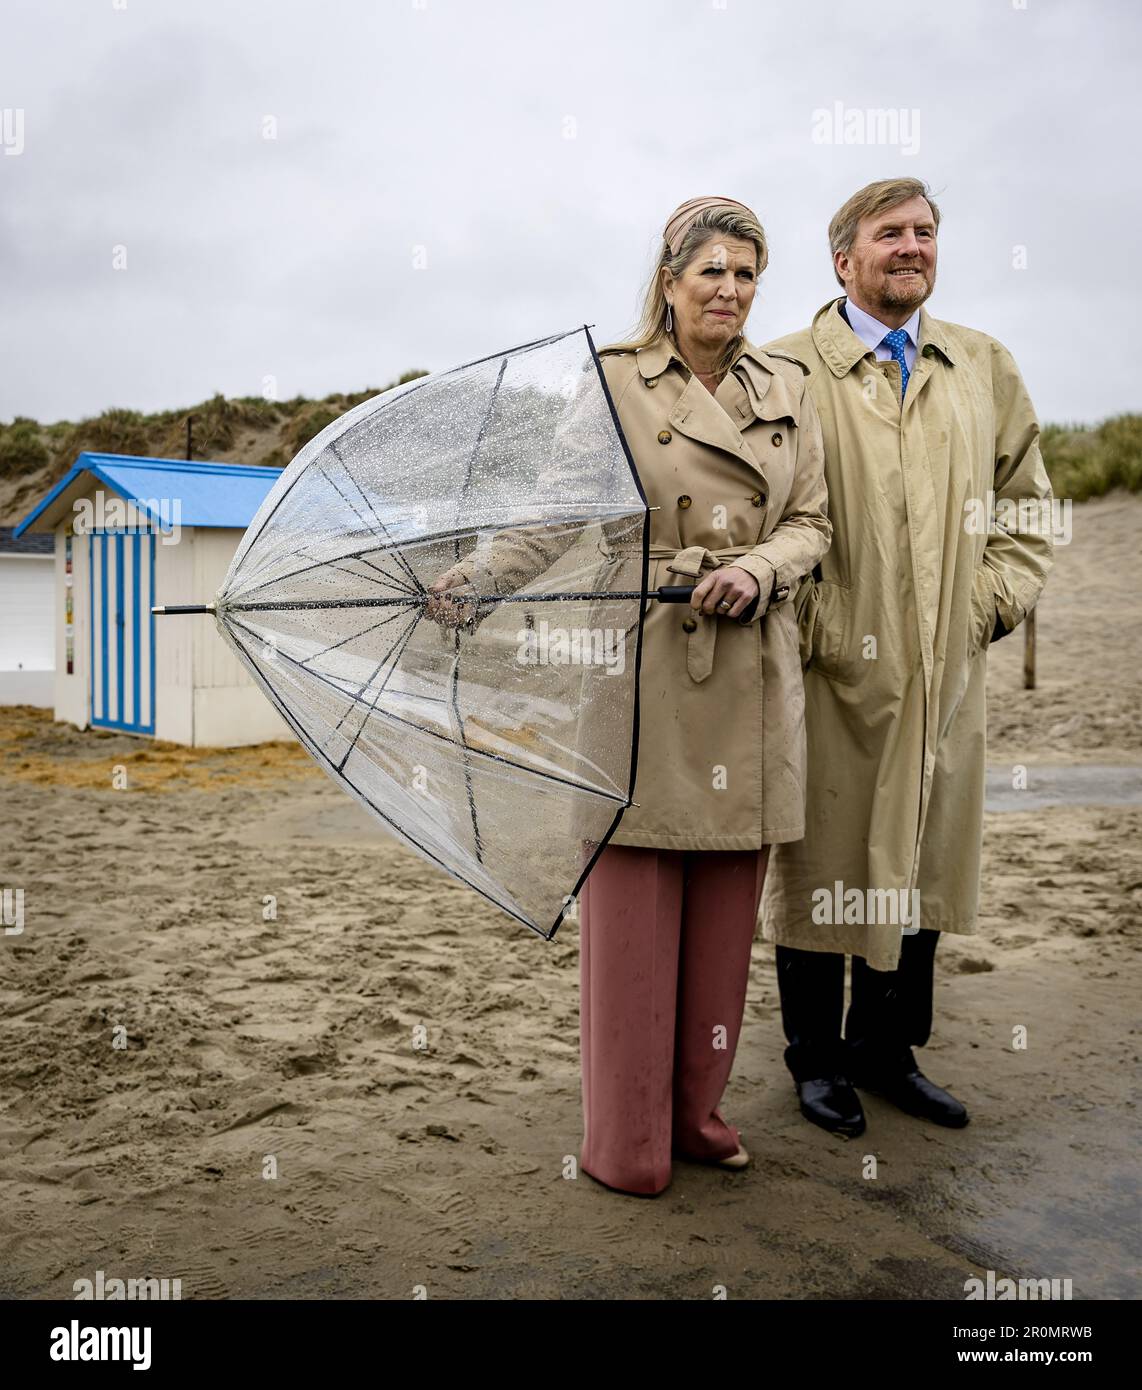 DEN HOORN - King Willem-Alexander and Queen Maxima pose at Beach Pavilion Paal 9. The royal couple is paying a two-day regional visit to the Wadden Islands. ANP SEM VAN DER WAL netherlands out - belgium out Credit: ANP/Alamy Live News Stock Photo